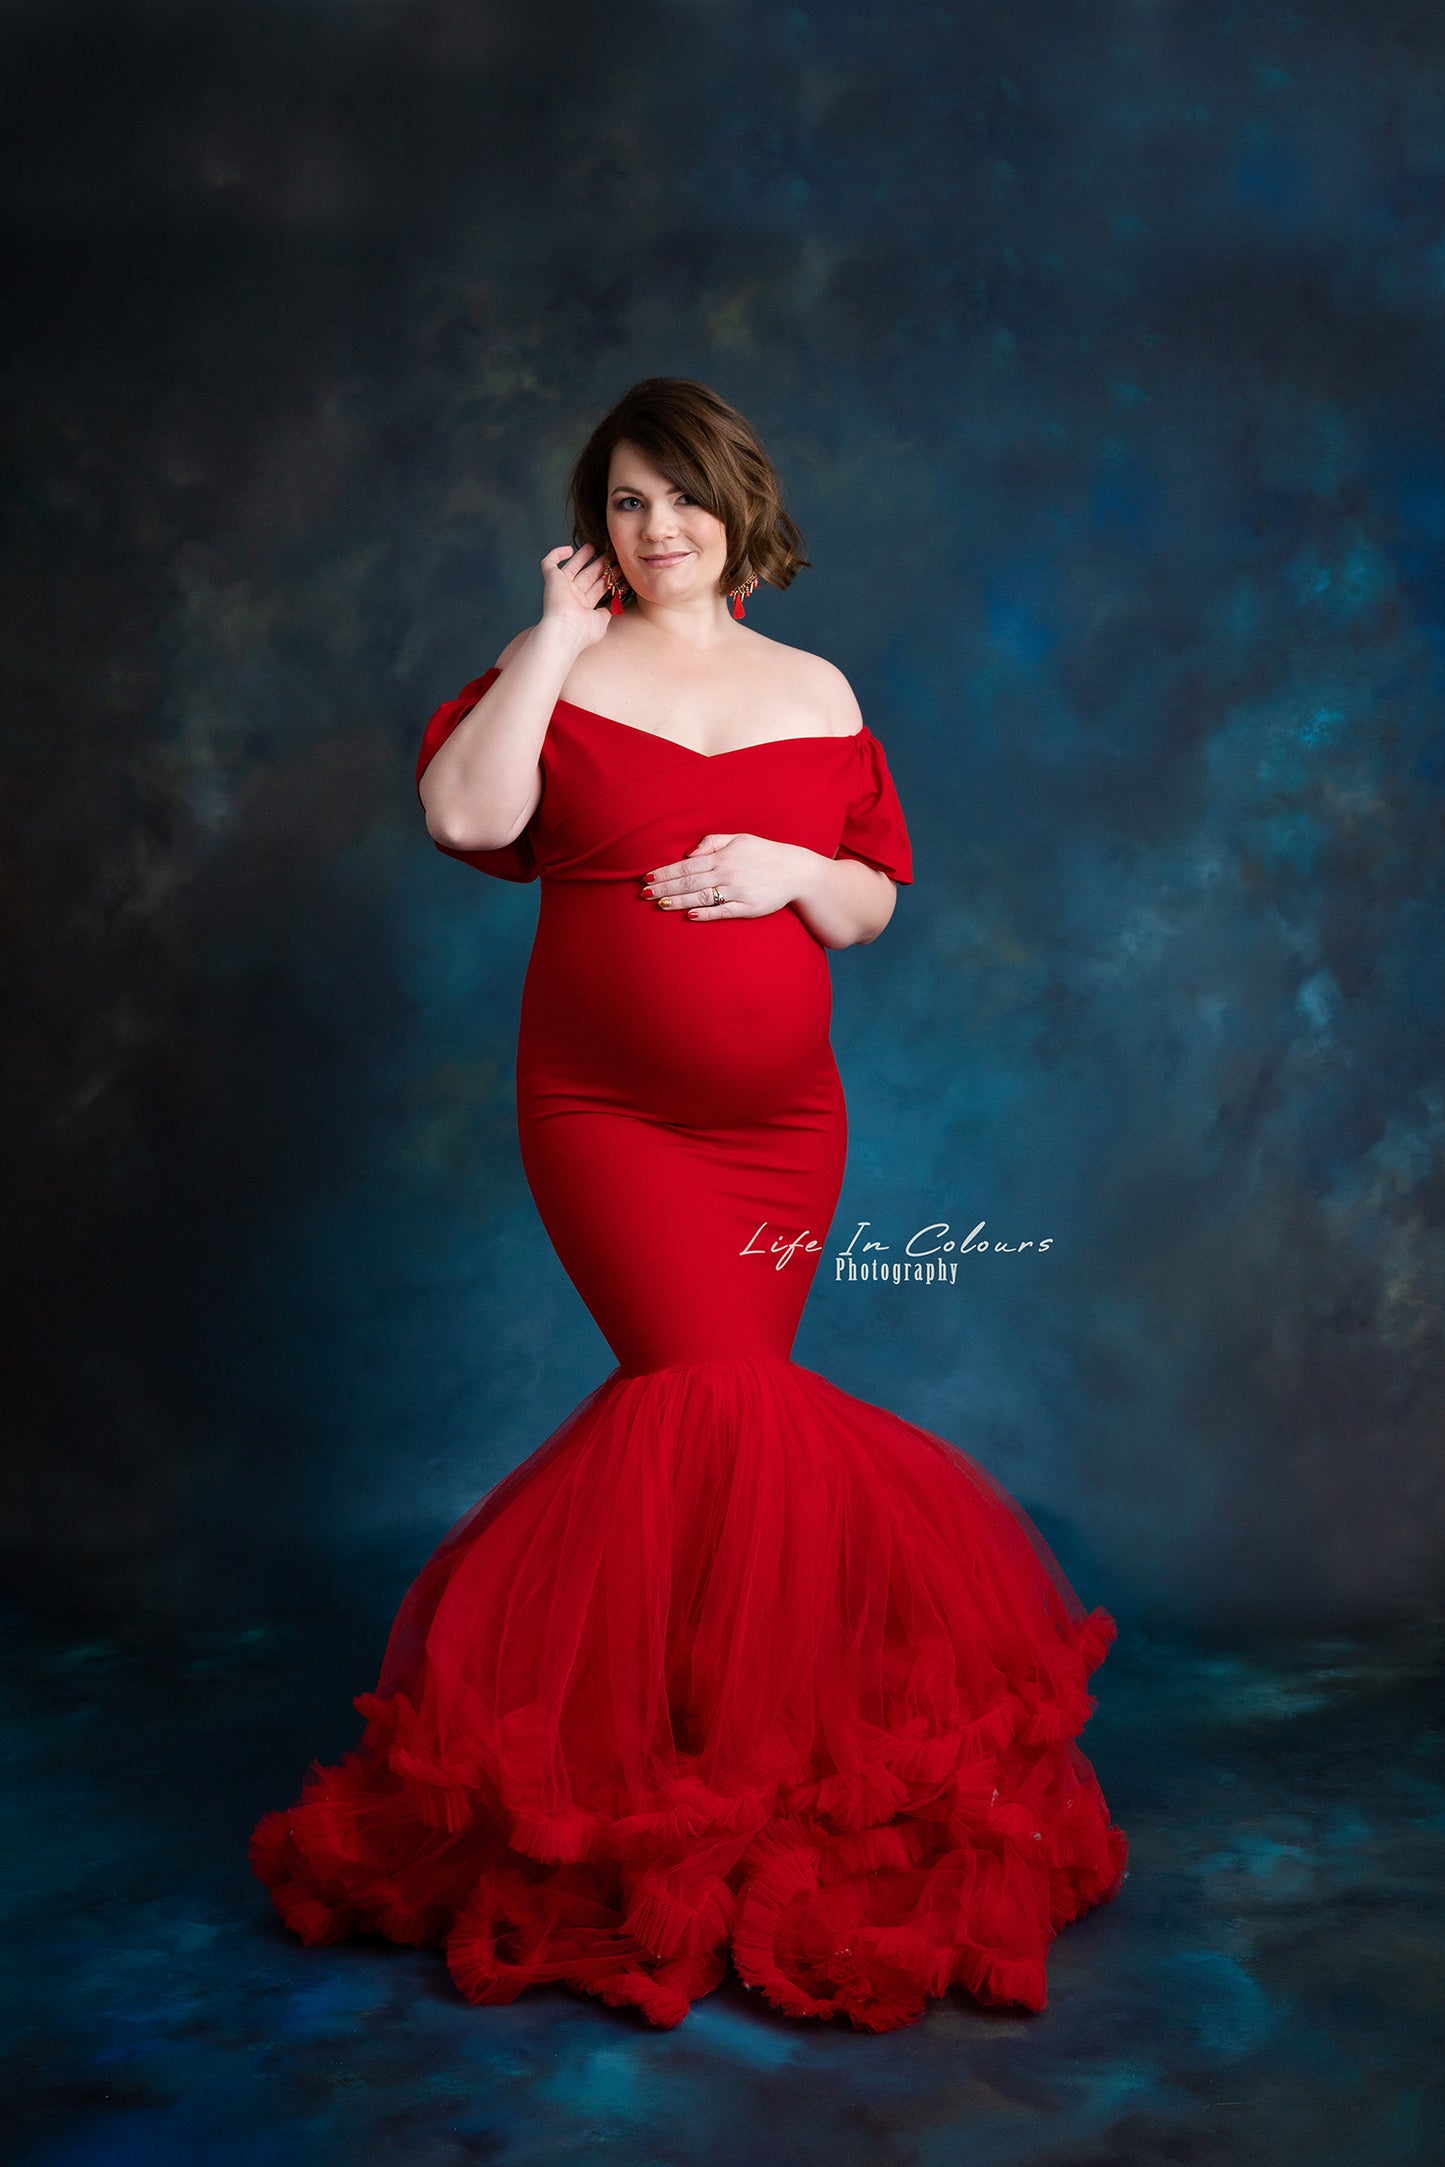 Tulle Dress Pregnant Woman Photography